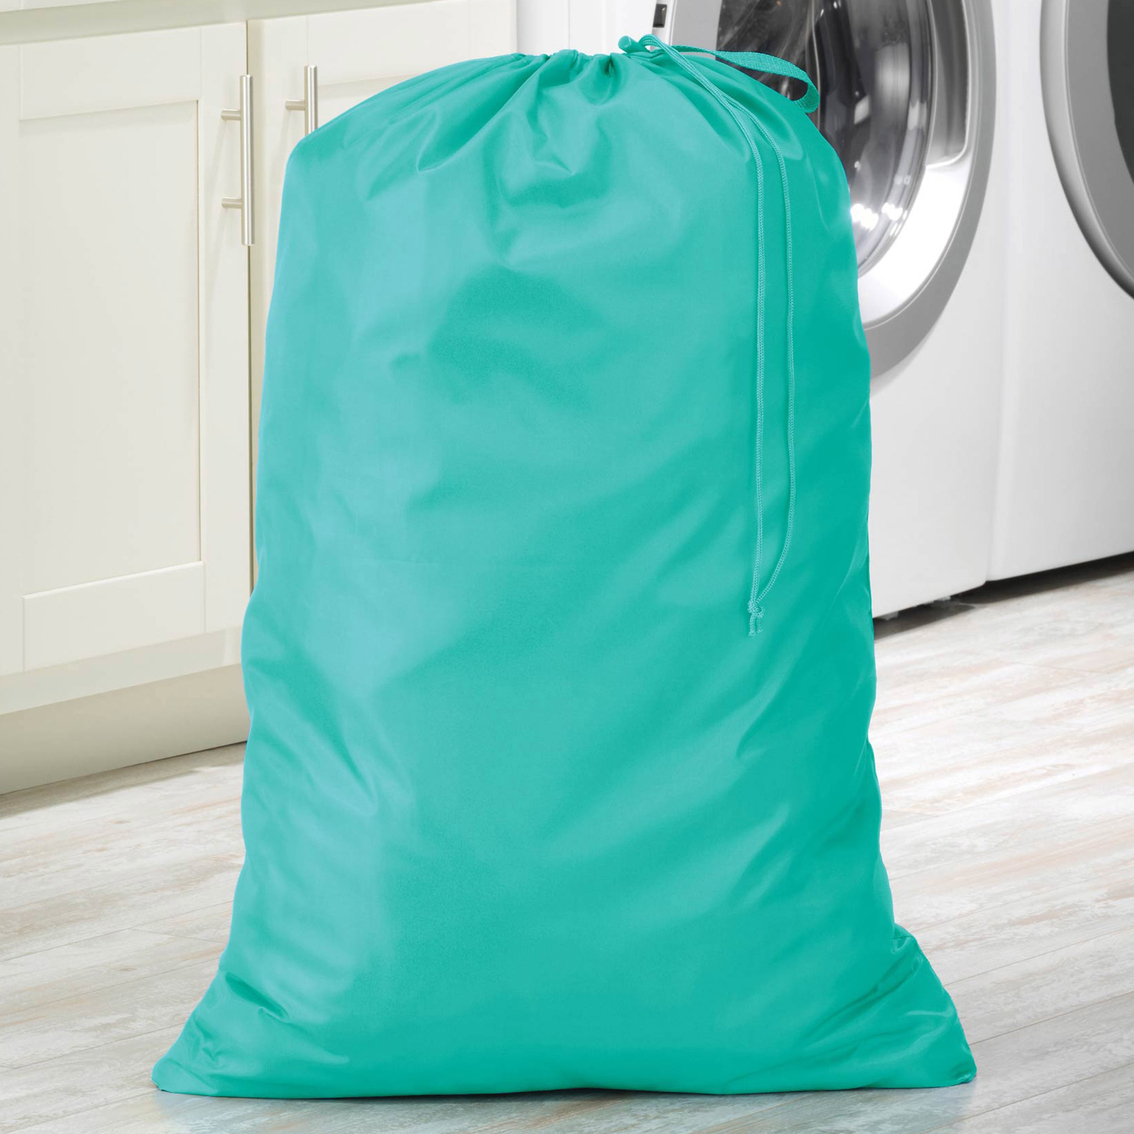 Whitmor Dura Clean Laundry Bag - Image 3 of 7